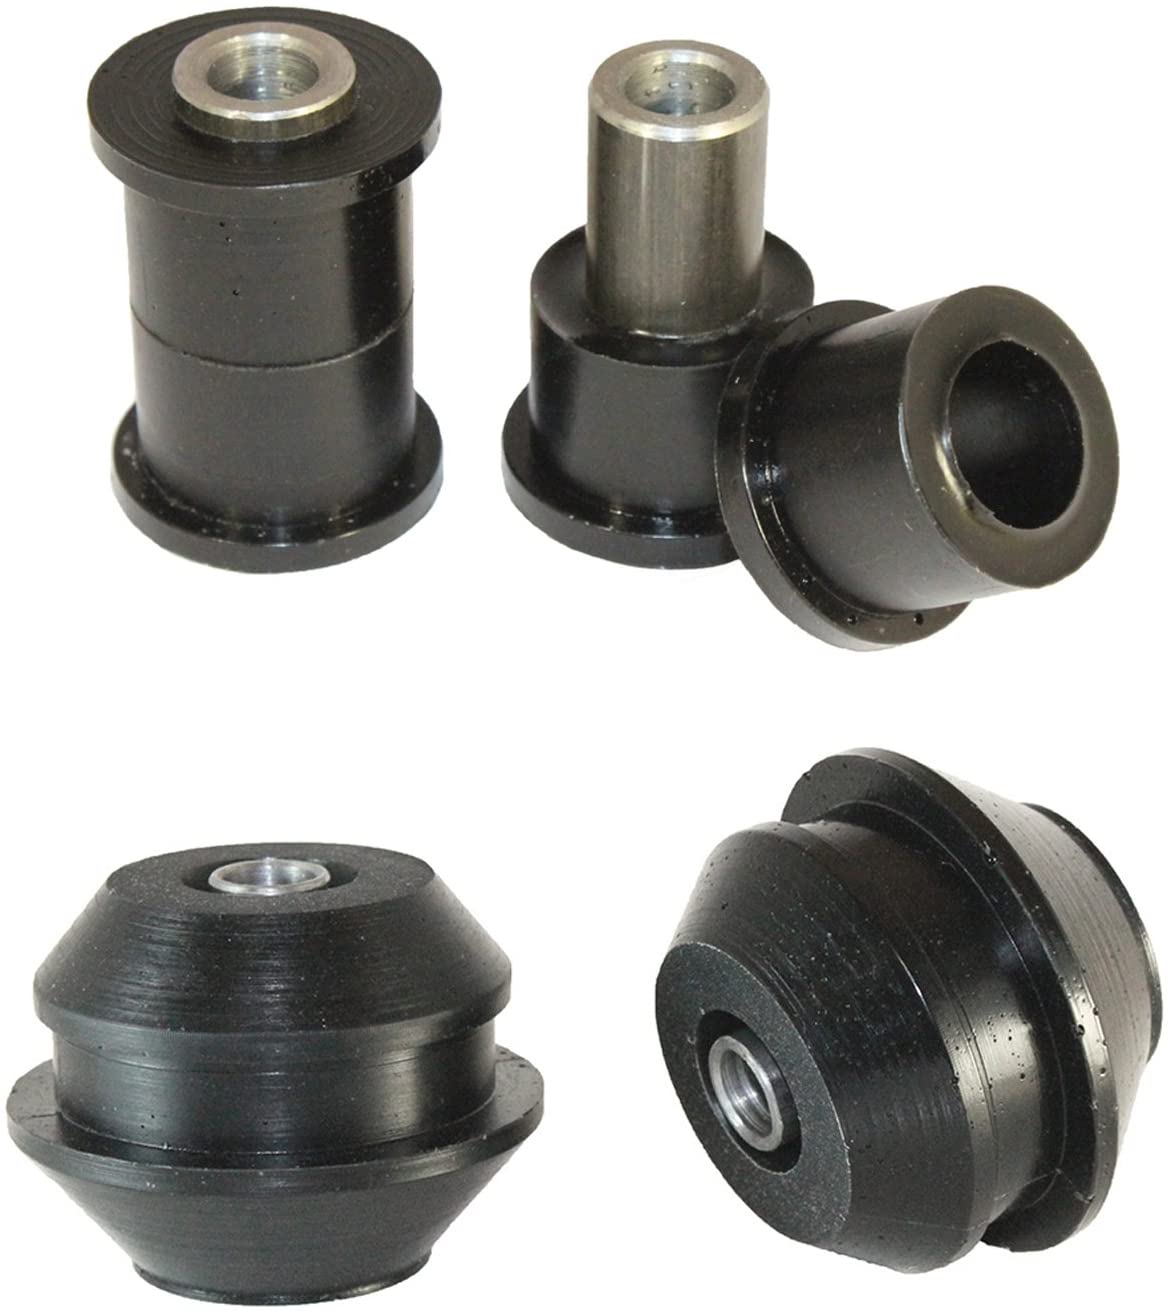 2x Front Lower Arm Front and Rear Bushing Kit Fits: Tiida Latio (04-12)